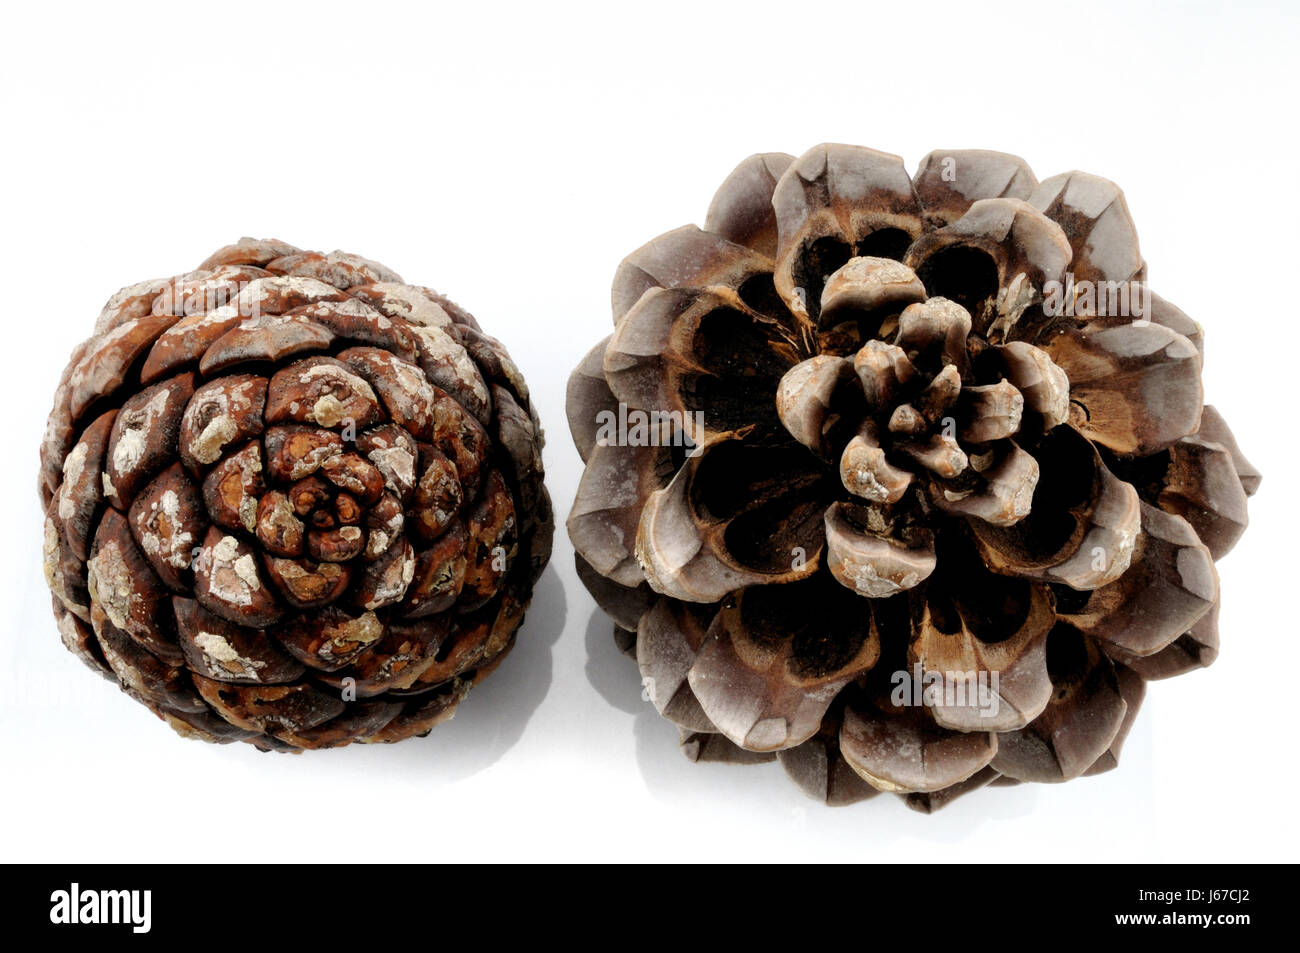 tap fir cone pines pine plant useful plant conifer open means agent medicine Stock Photo